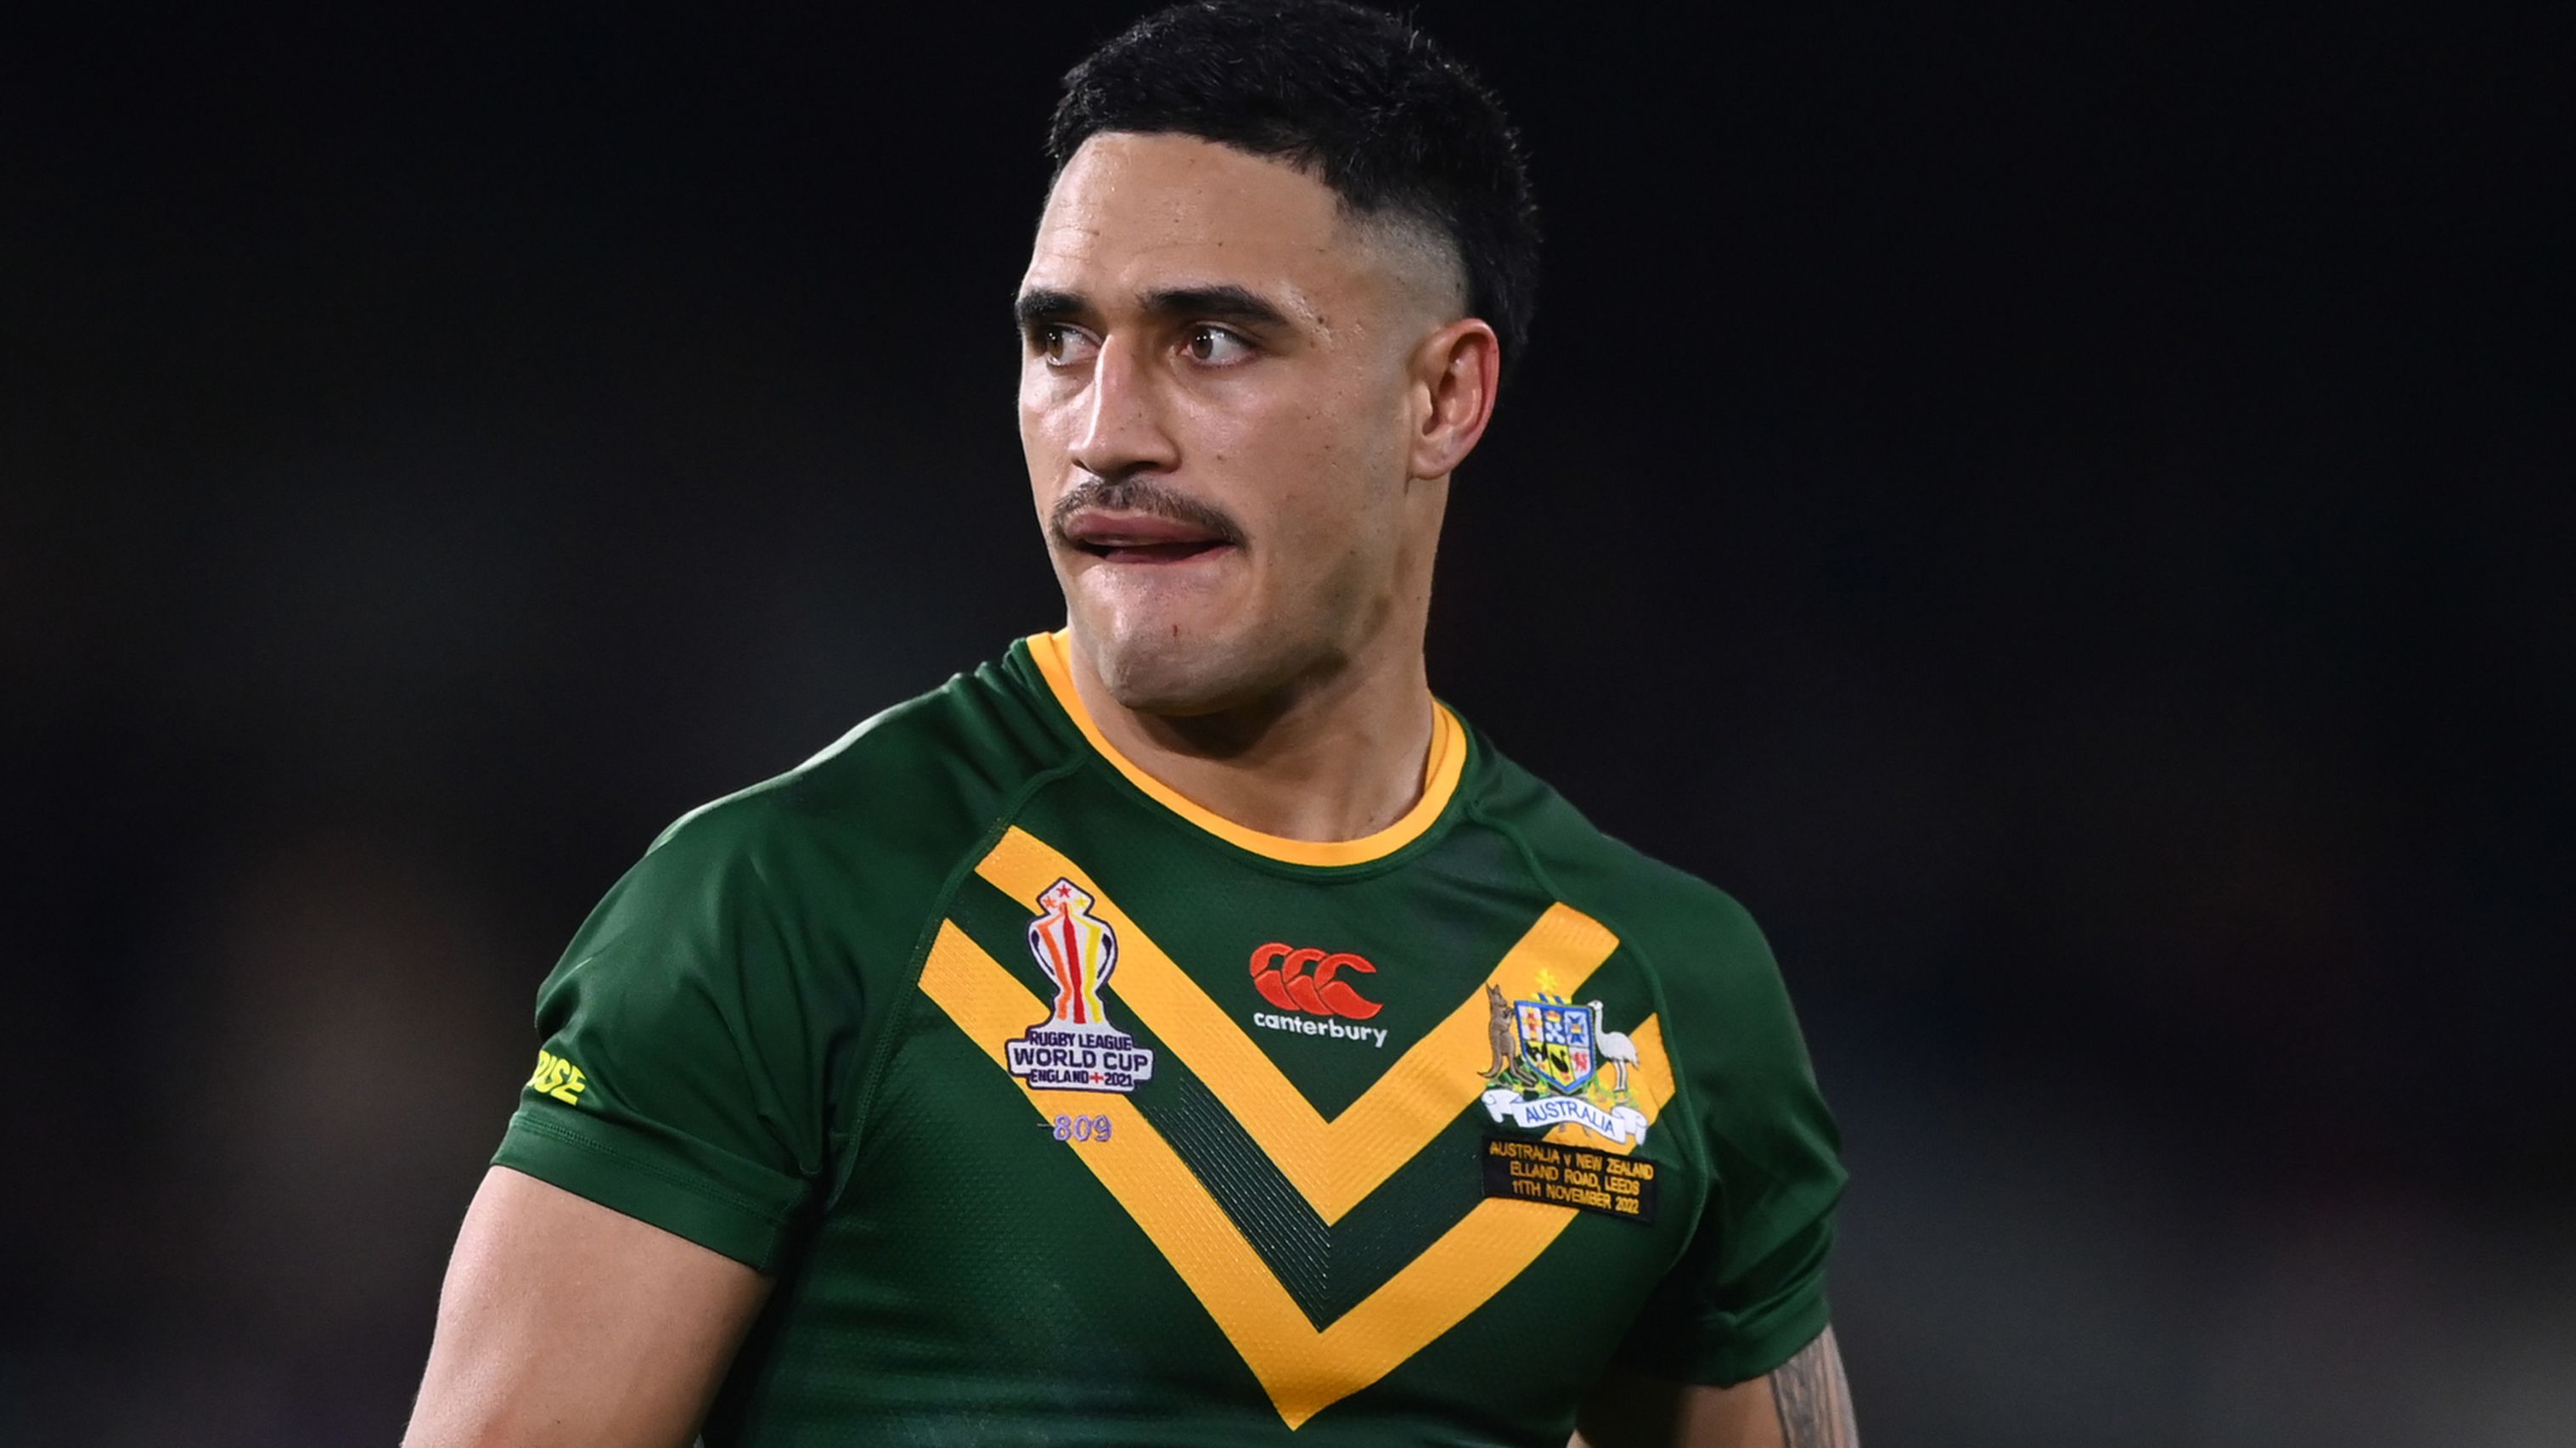 LEEDS, ENGLAND - NOVEMBER 11: Valentine Holmes of Australia during the Rugby League World Cup Semi-Final match between Australia and New Zealand at Elland Road on November 11, 2022 in Leeds, England. (Photo by Gareth Copley/Getty Images)